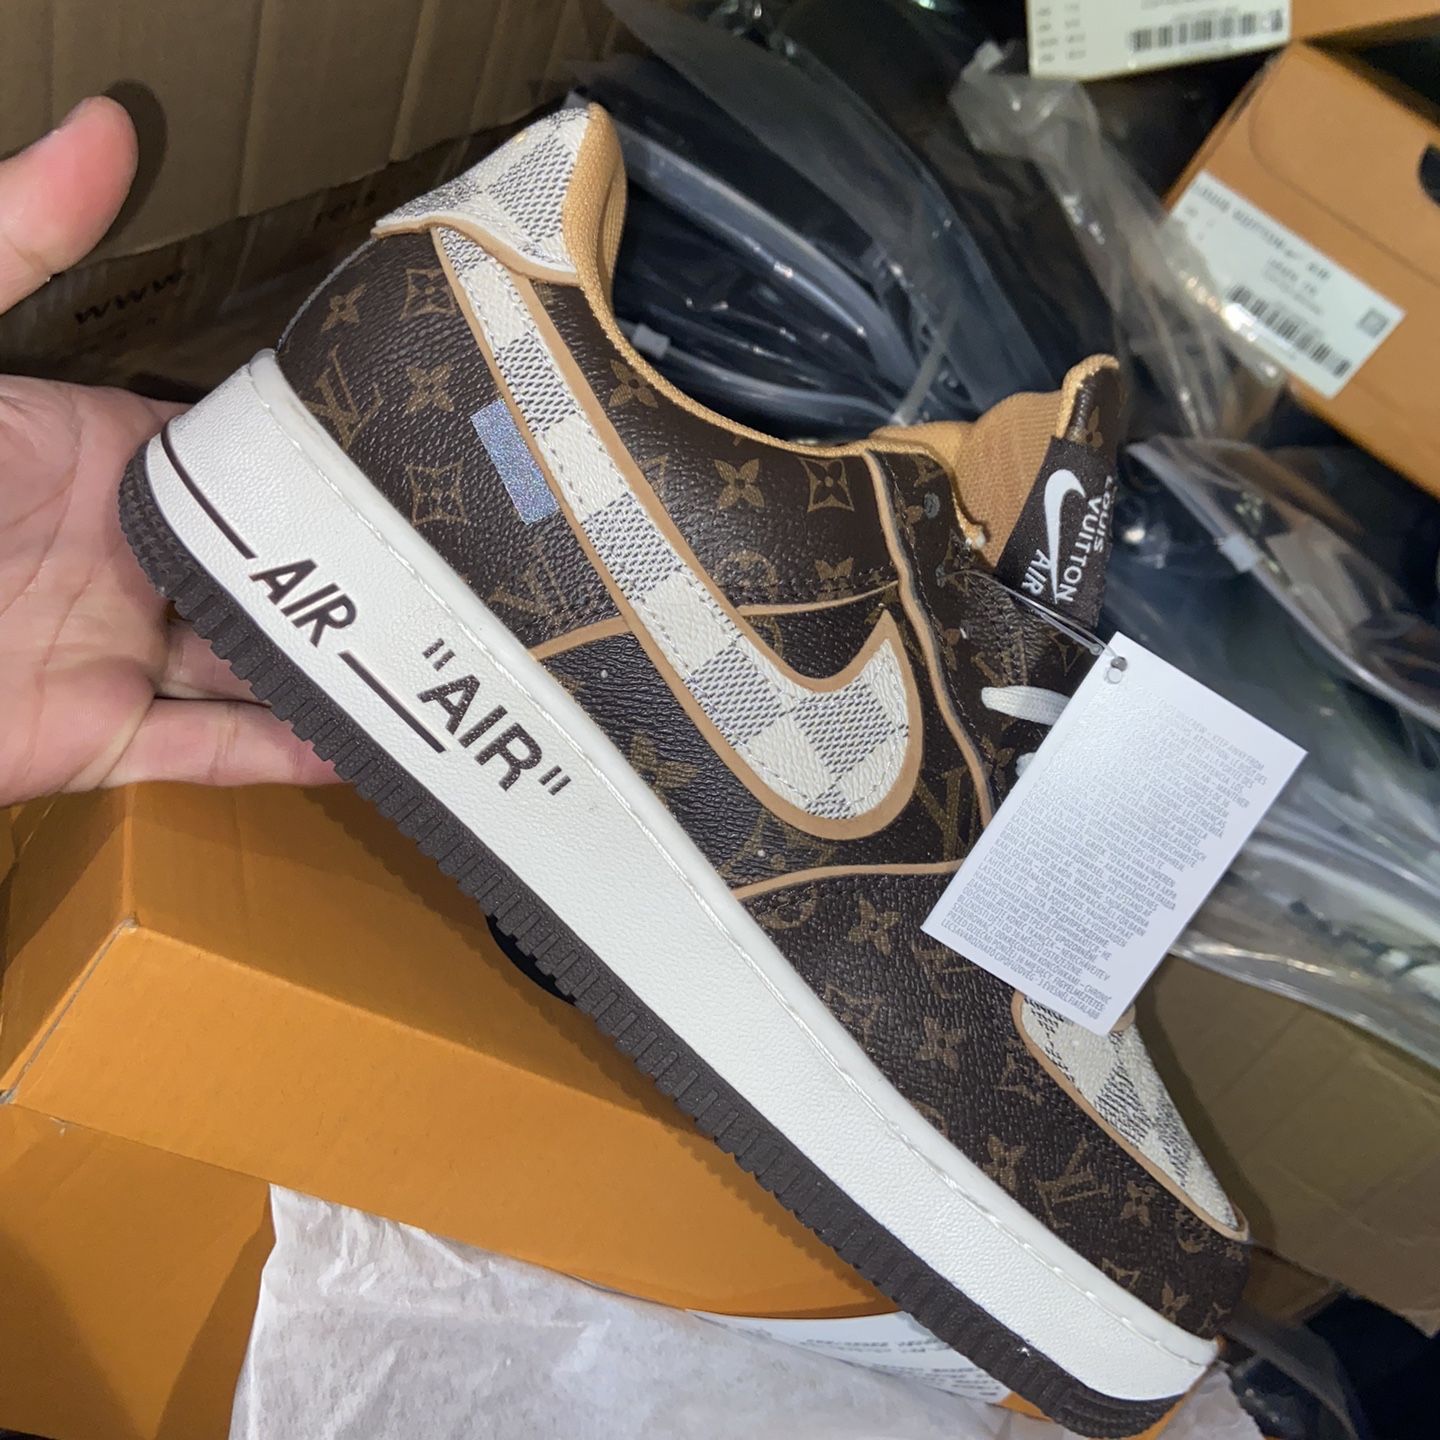 Louis Vuitton Nike Air Force 1 Low for Sale in Philadelphia, PA - OfferUp